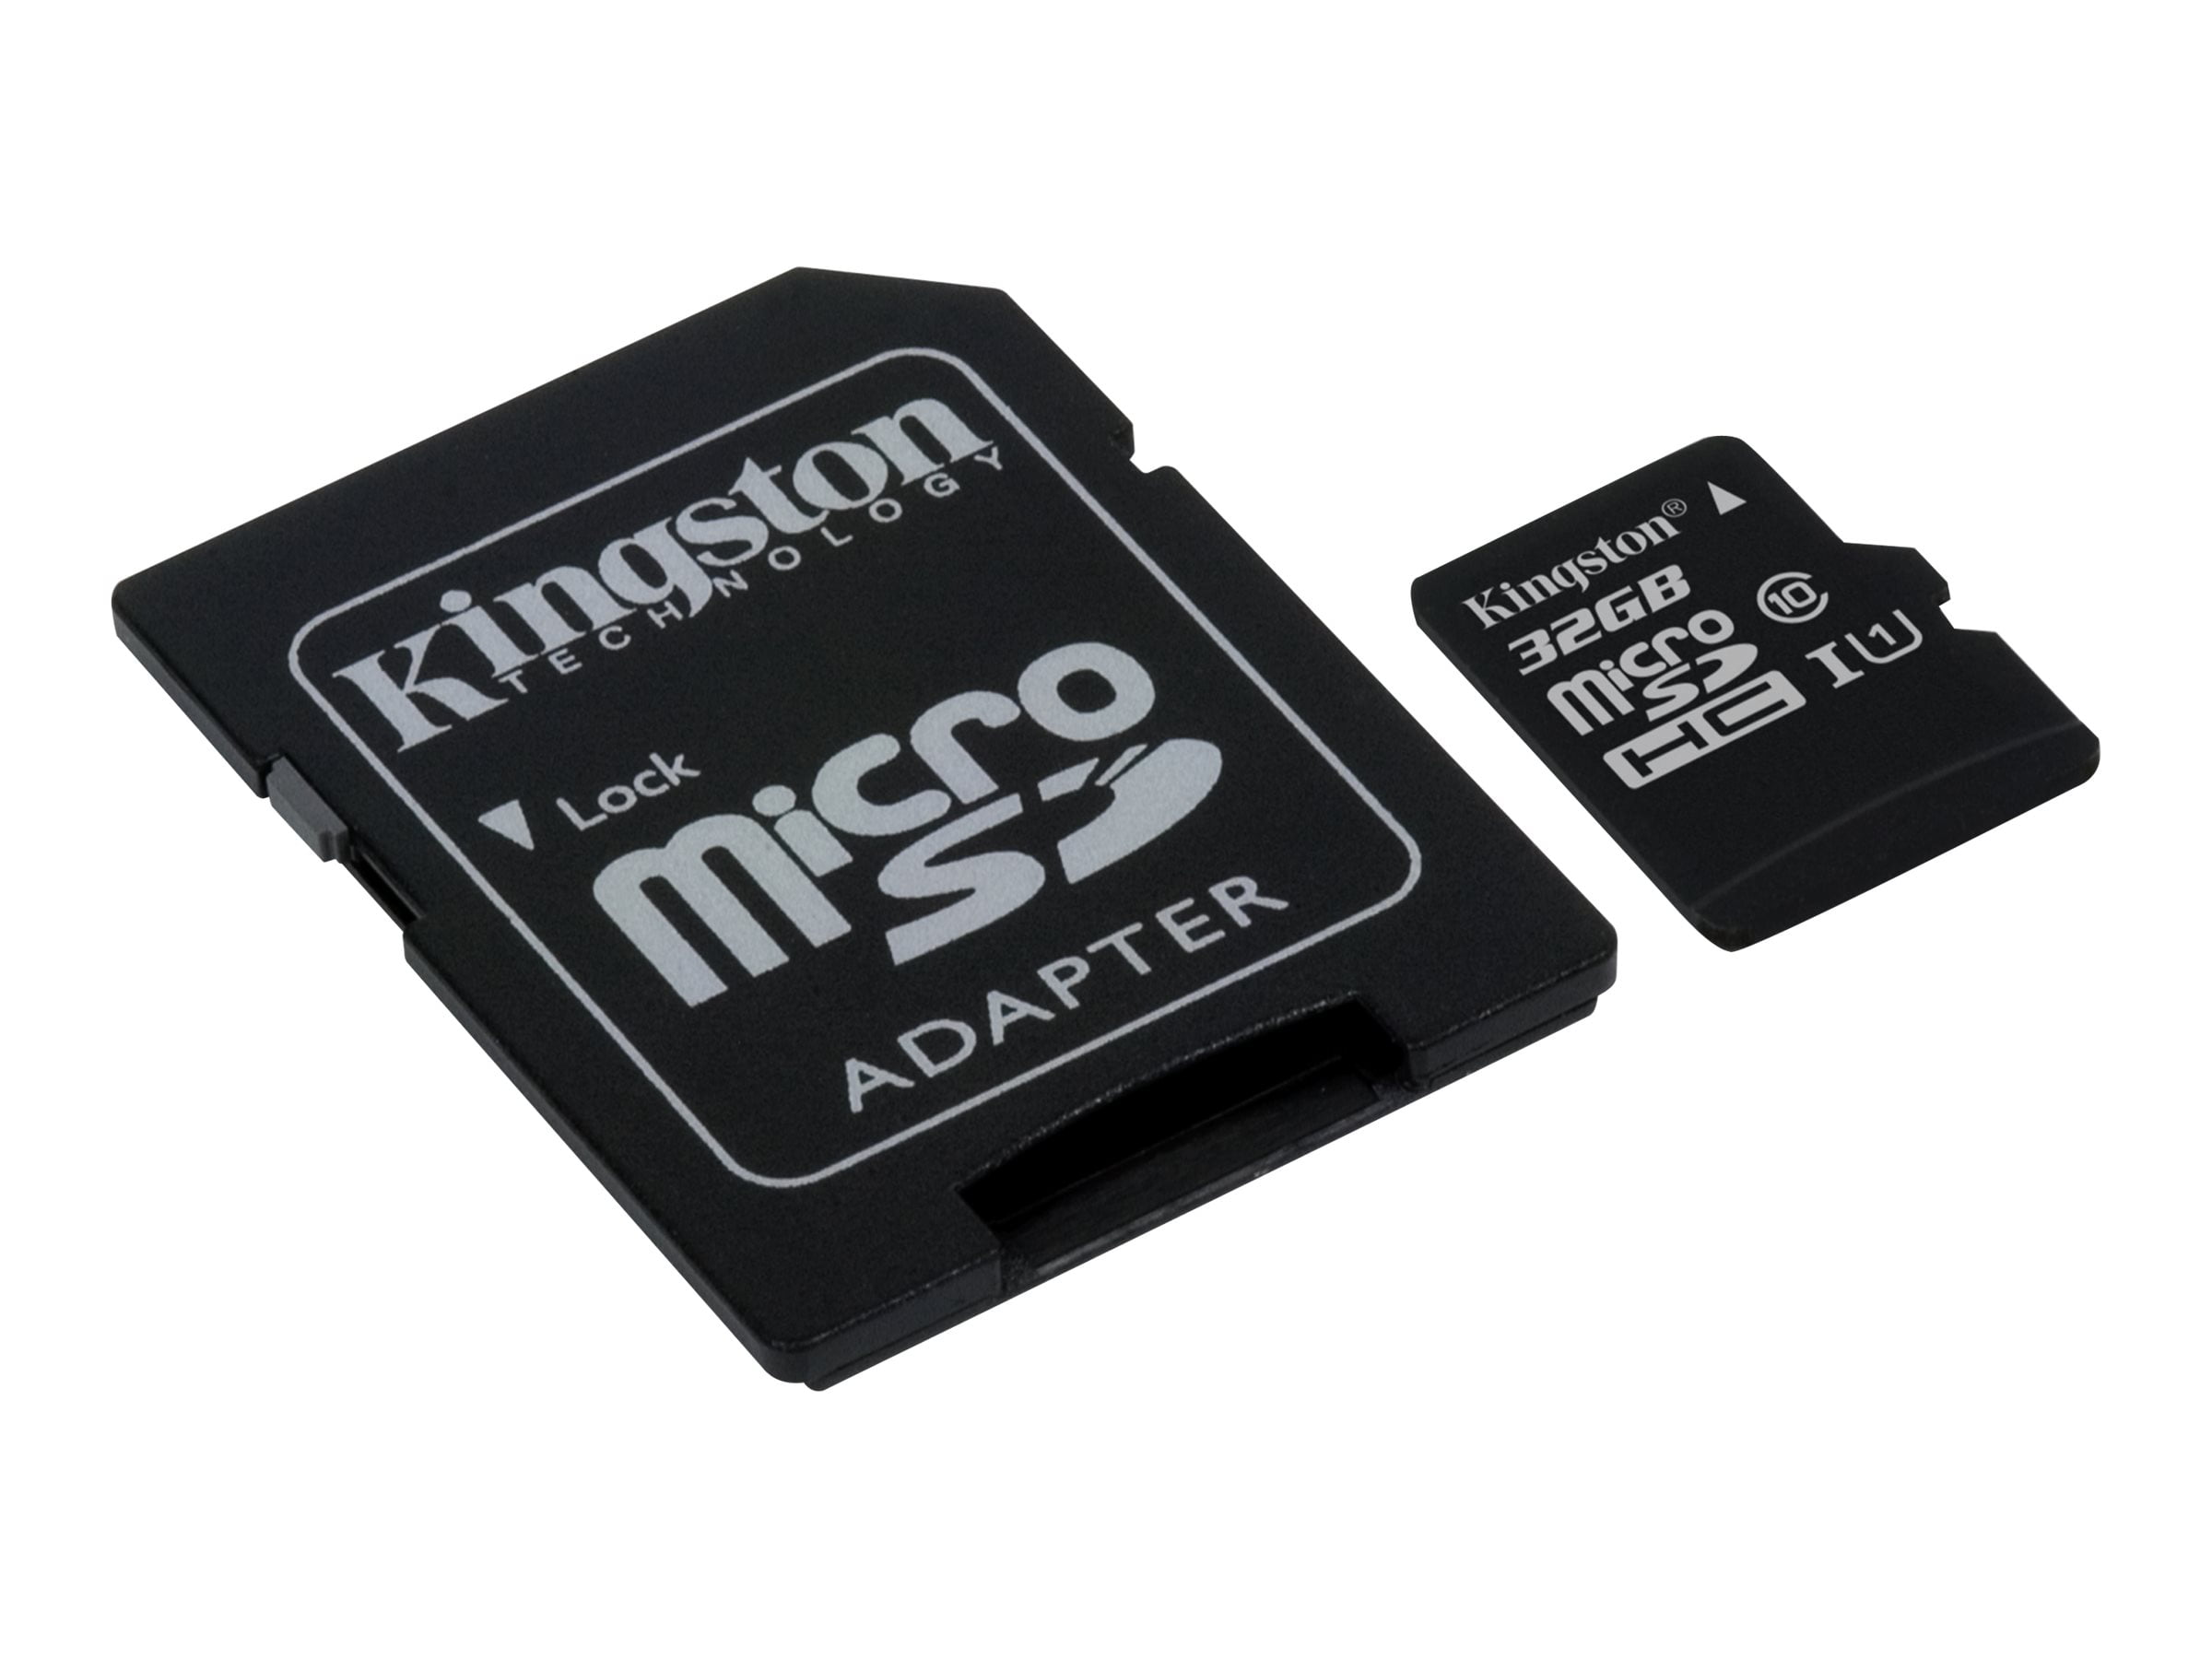 Kingston 32GB Samsung N5120 MicroSDHC Canvas Select Plus Card Verified by SanFlash. 100MBs Works with Kingston 